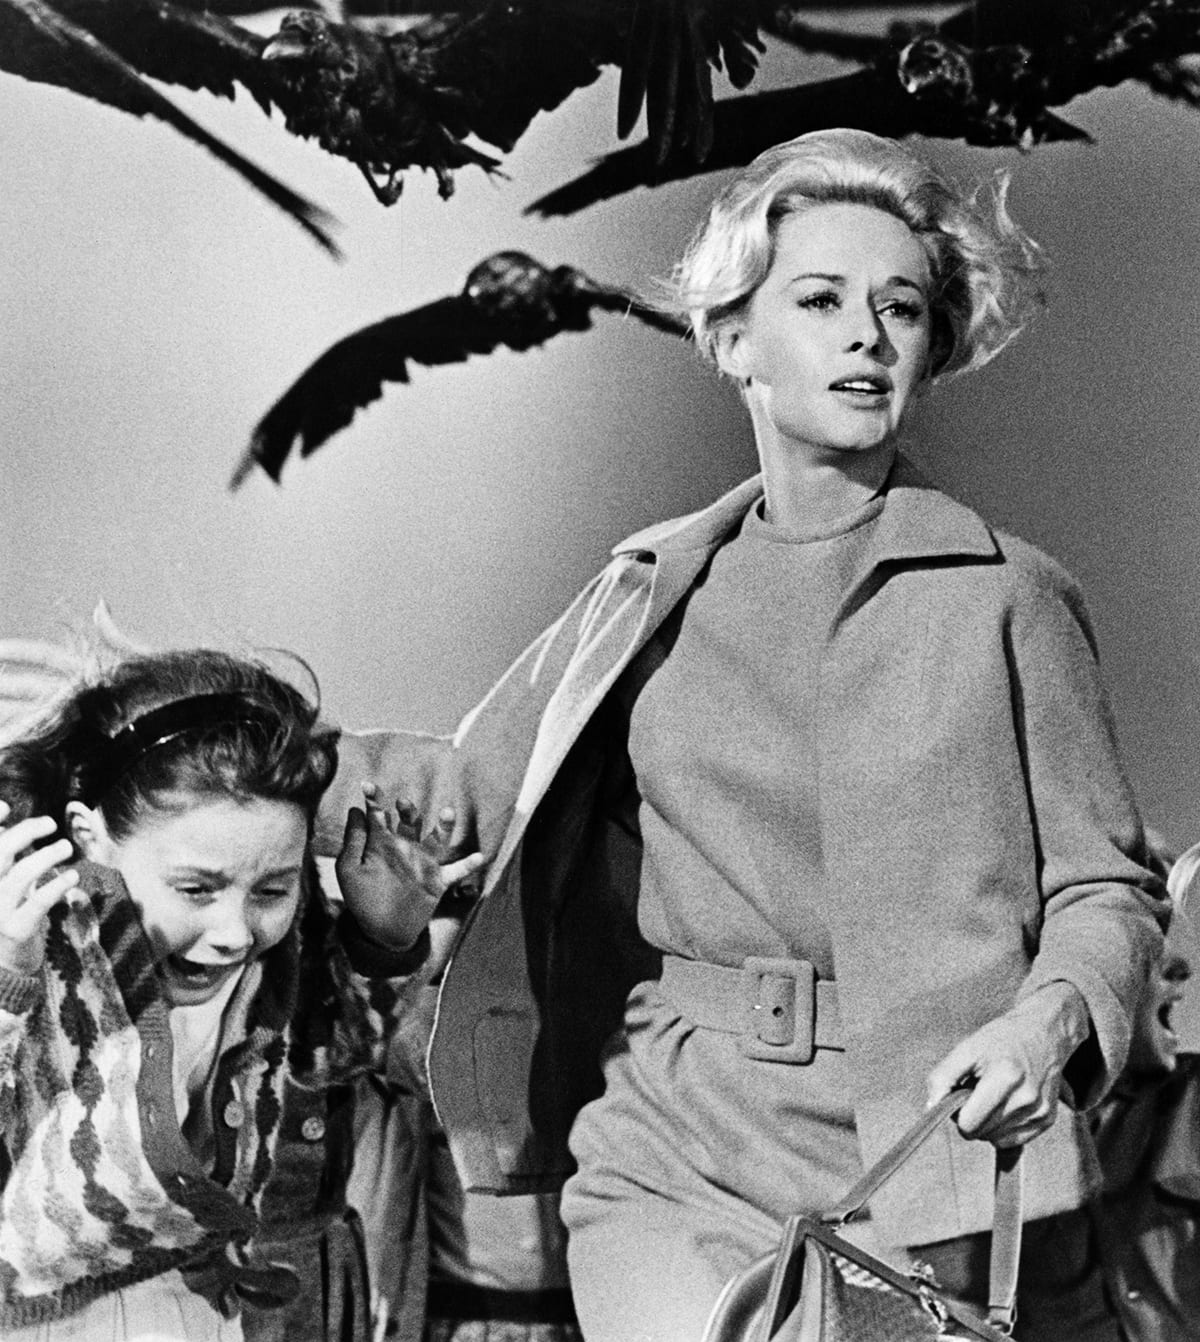 A scene from the 1963 Hollywood horror classic, The Birds. The movie drew inspiration from a real-life situation in Monterey Bay, California where seabirds became disoriented and began slamming into homes after ingesting toxic algae. (Photo Courtesy of Universal Studios Licensing LLC)